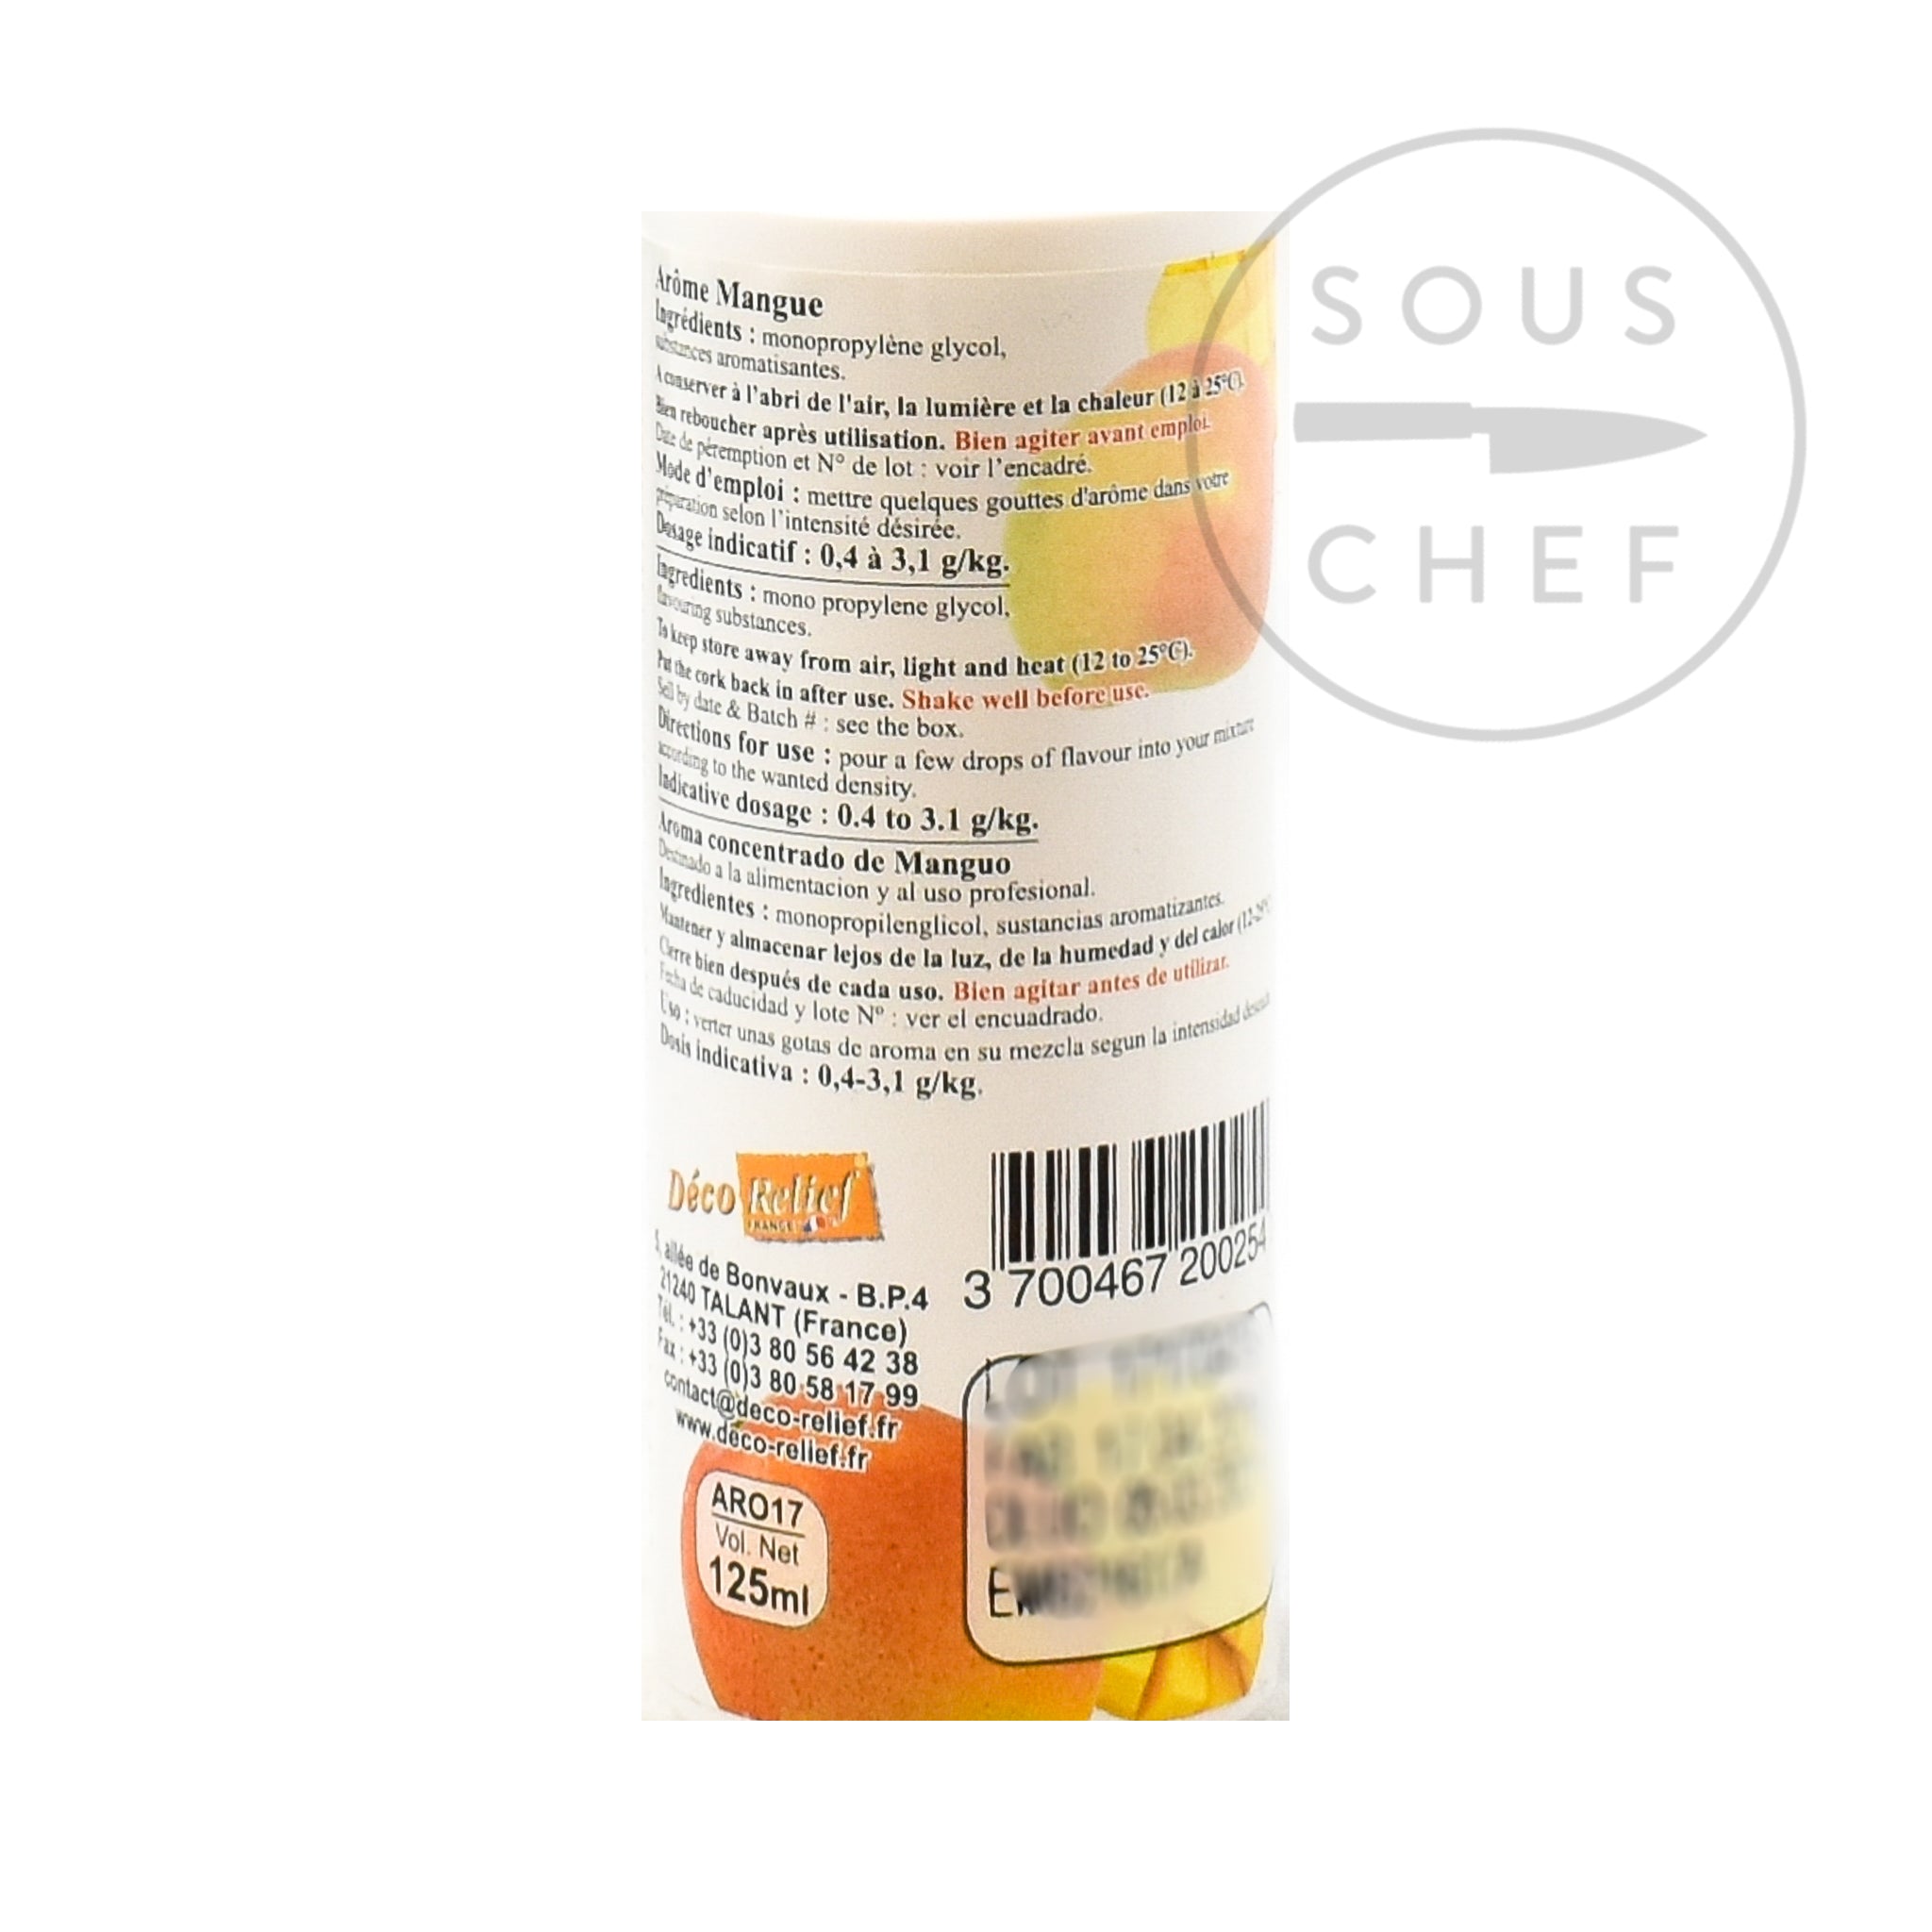 Concentrated Mango Flavour 125ml ingredients